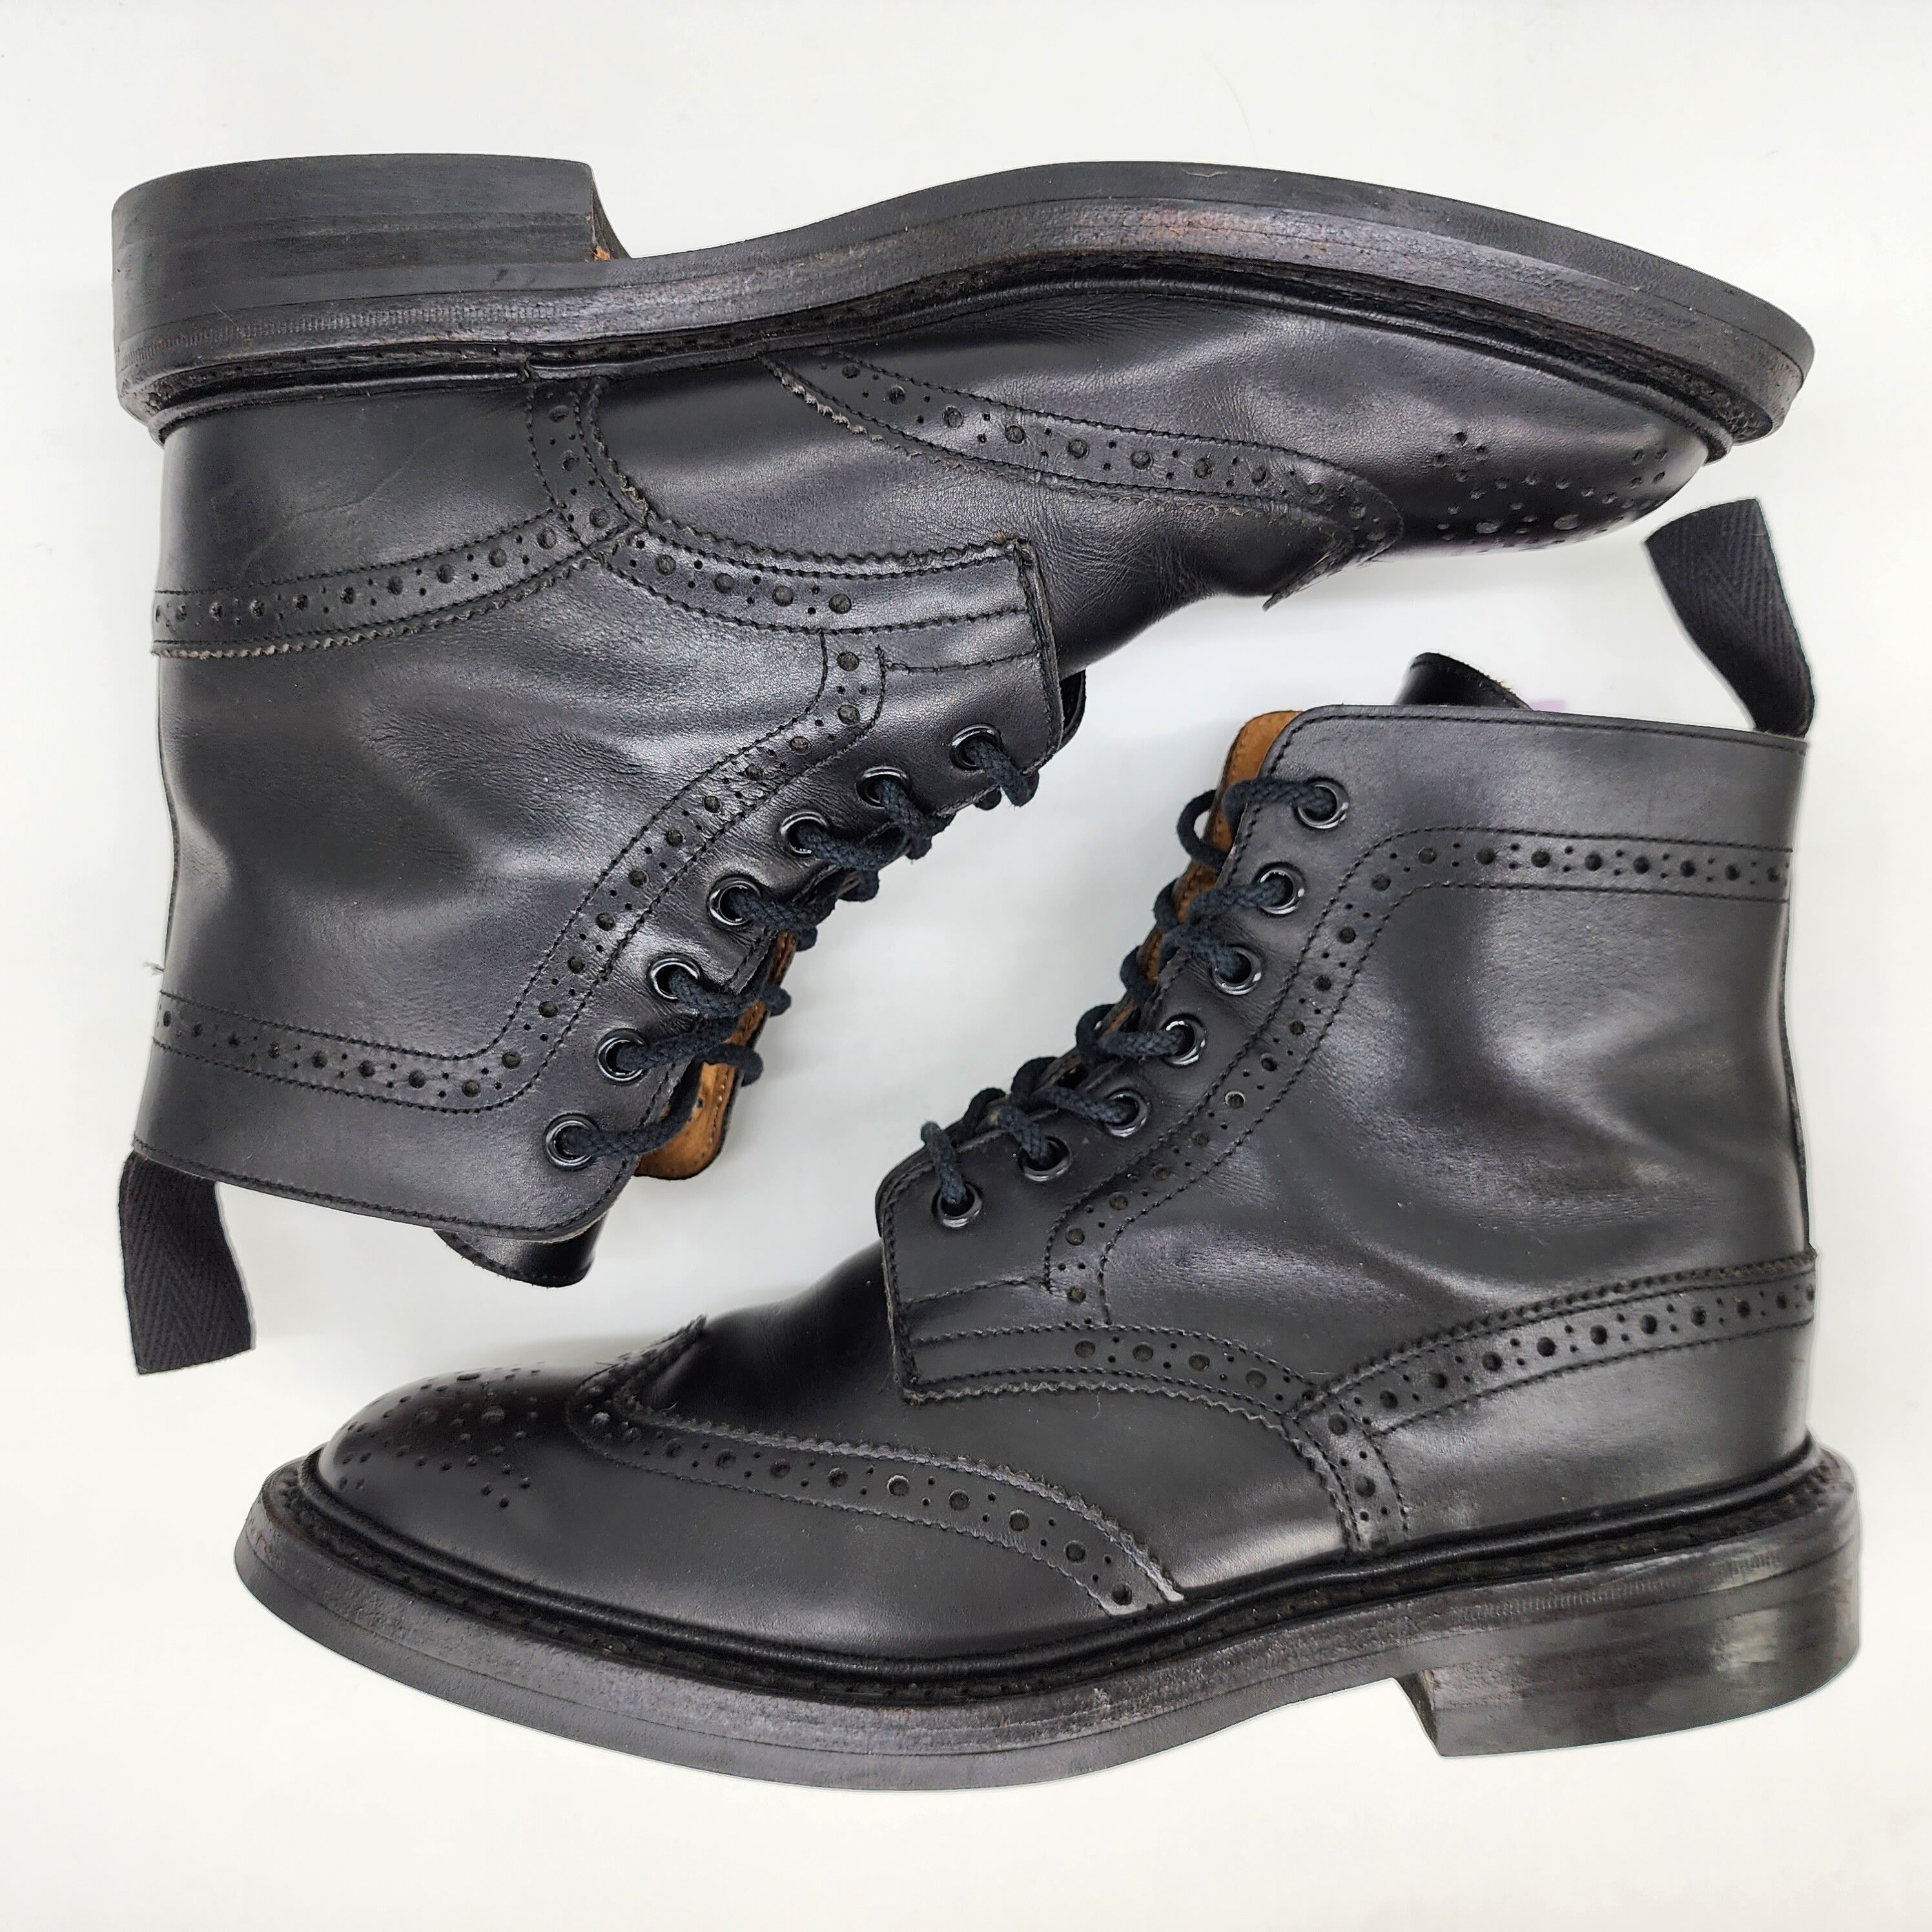 Trickers - Stow Boots - Black - 7